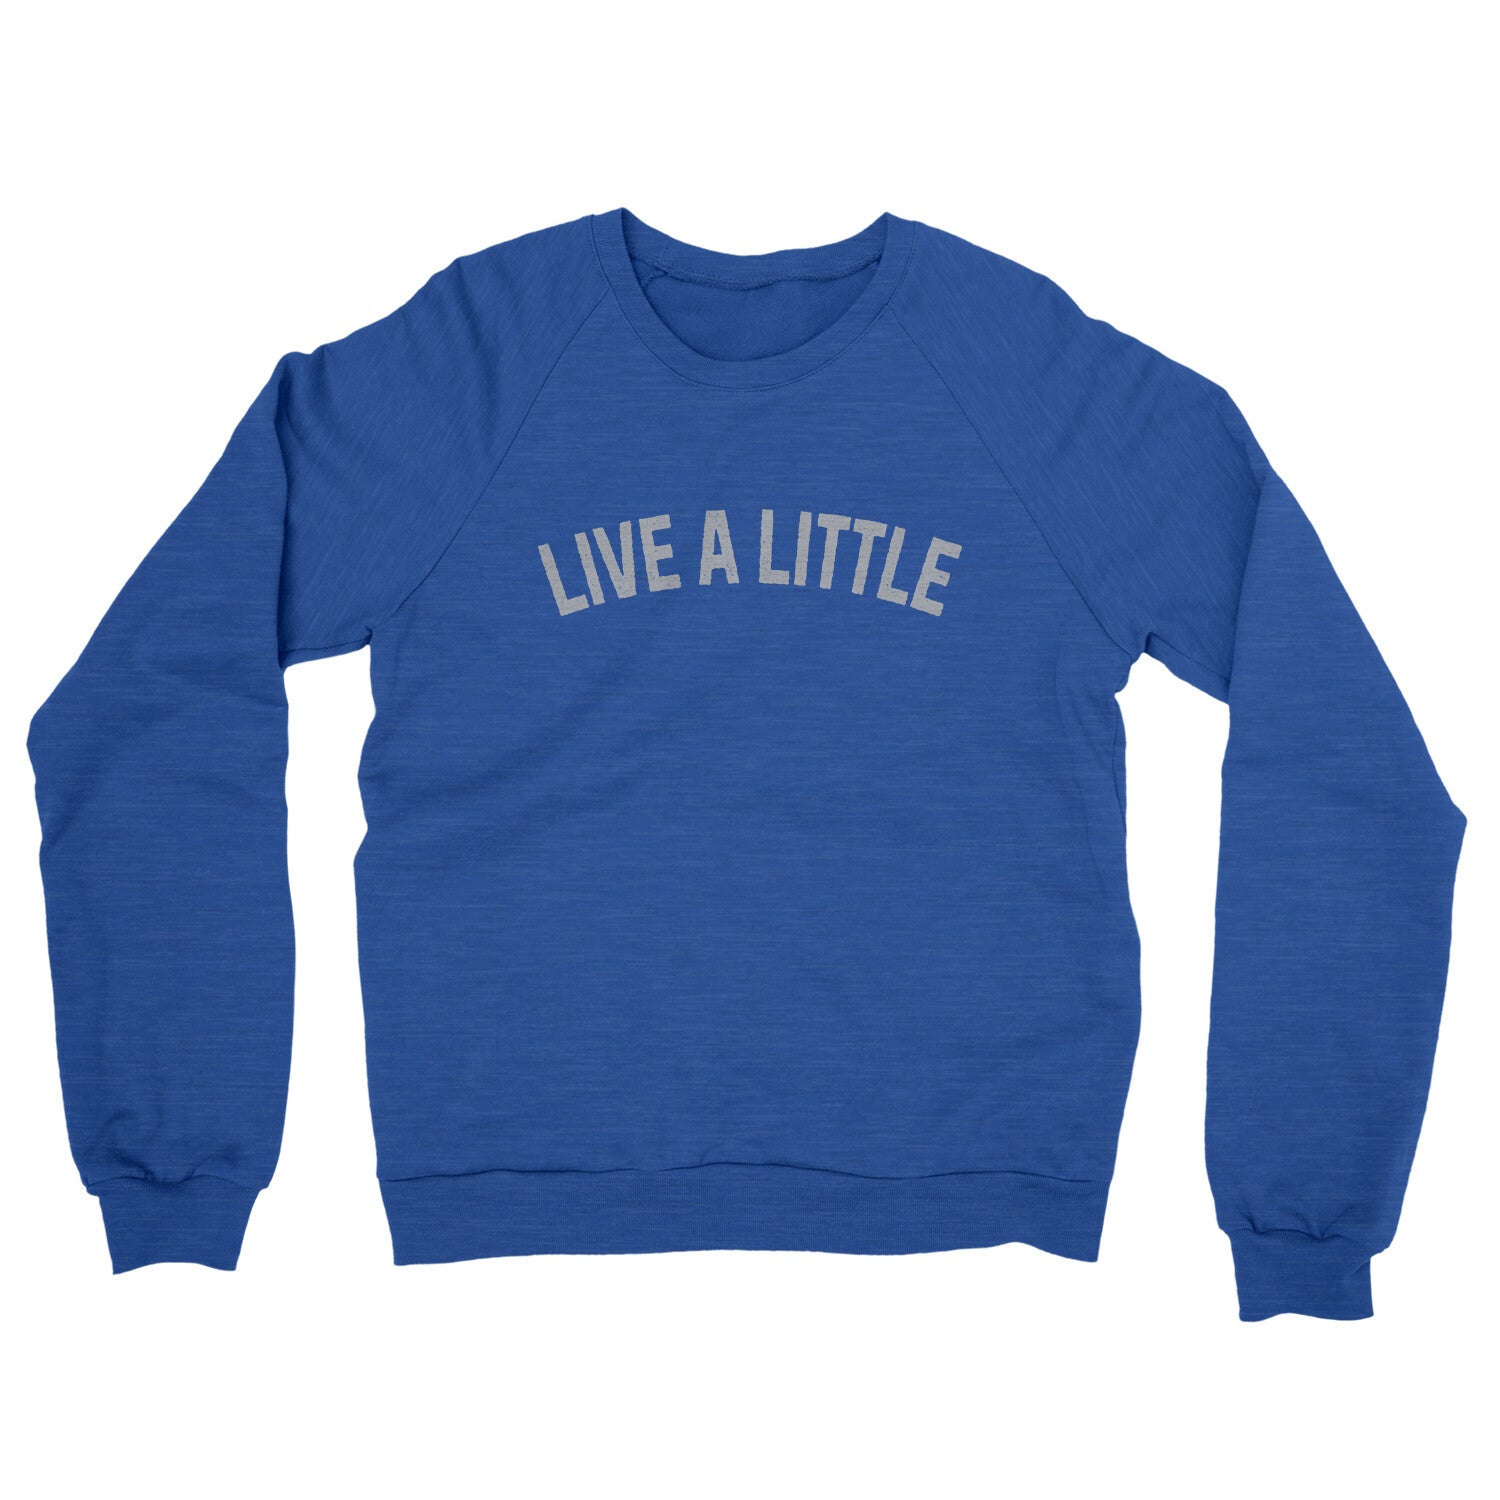 Live a Little in Heather Royal Color